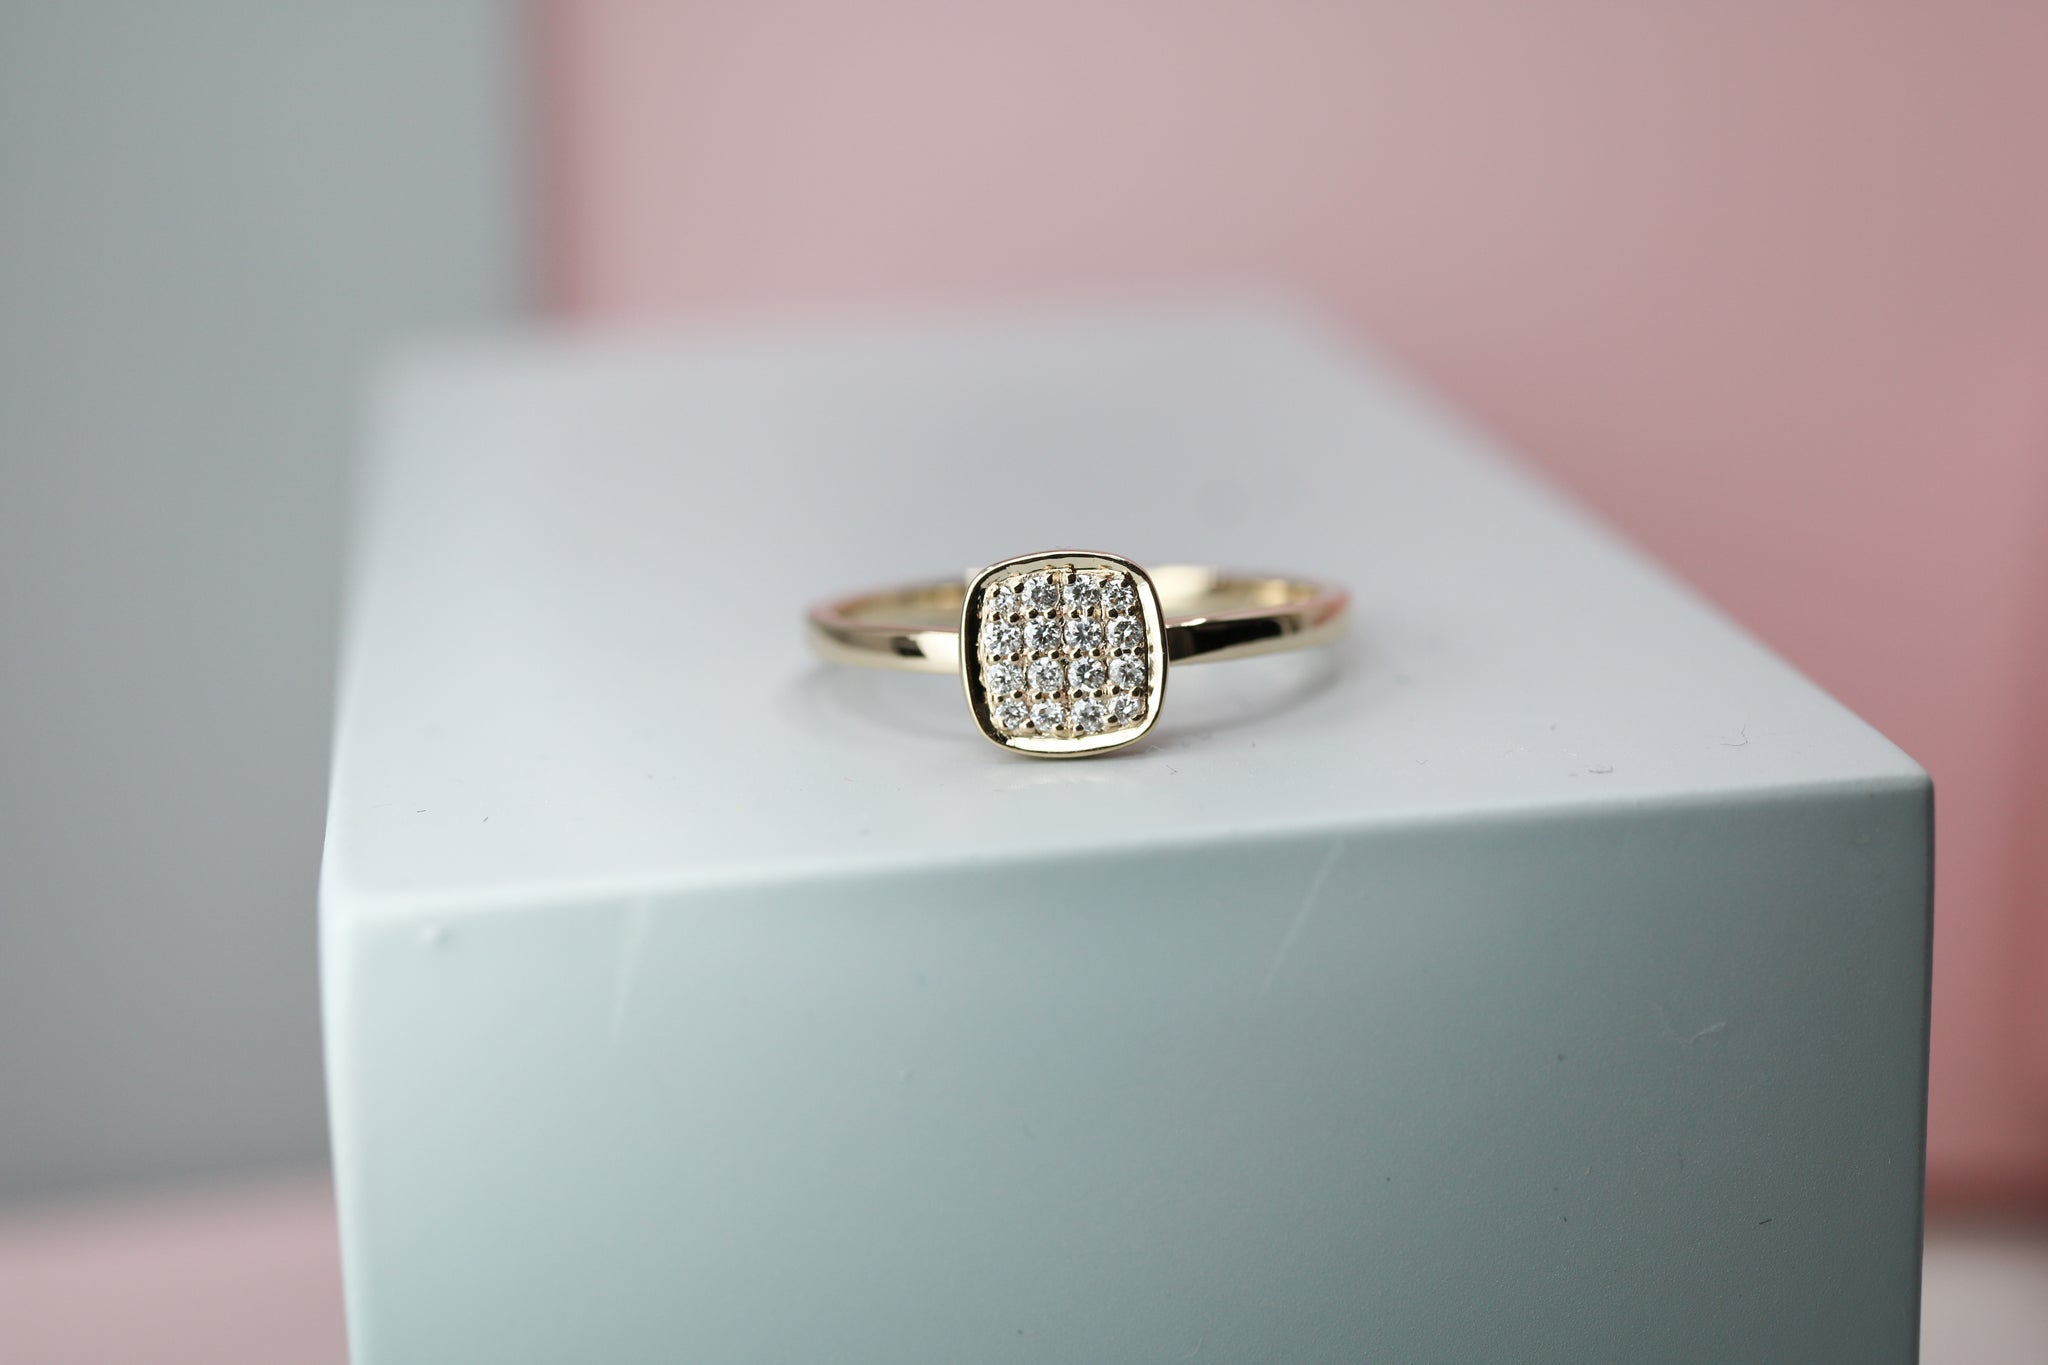 18ct Gold Geometric Pave Diamond Ring - HJ3012 - Hallmark Jewellers Formby & The Jewellers Bench Widnes